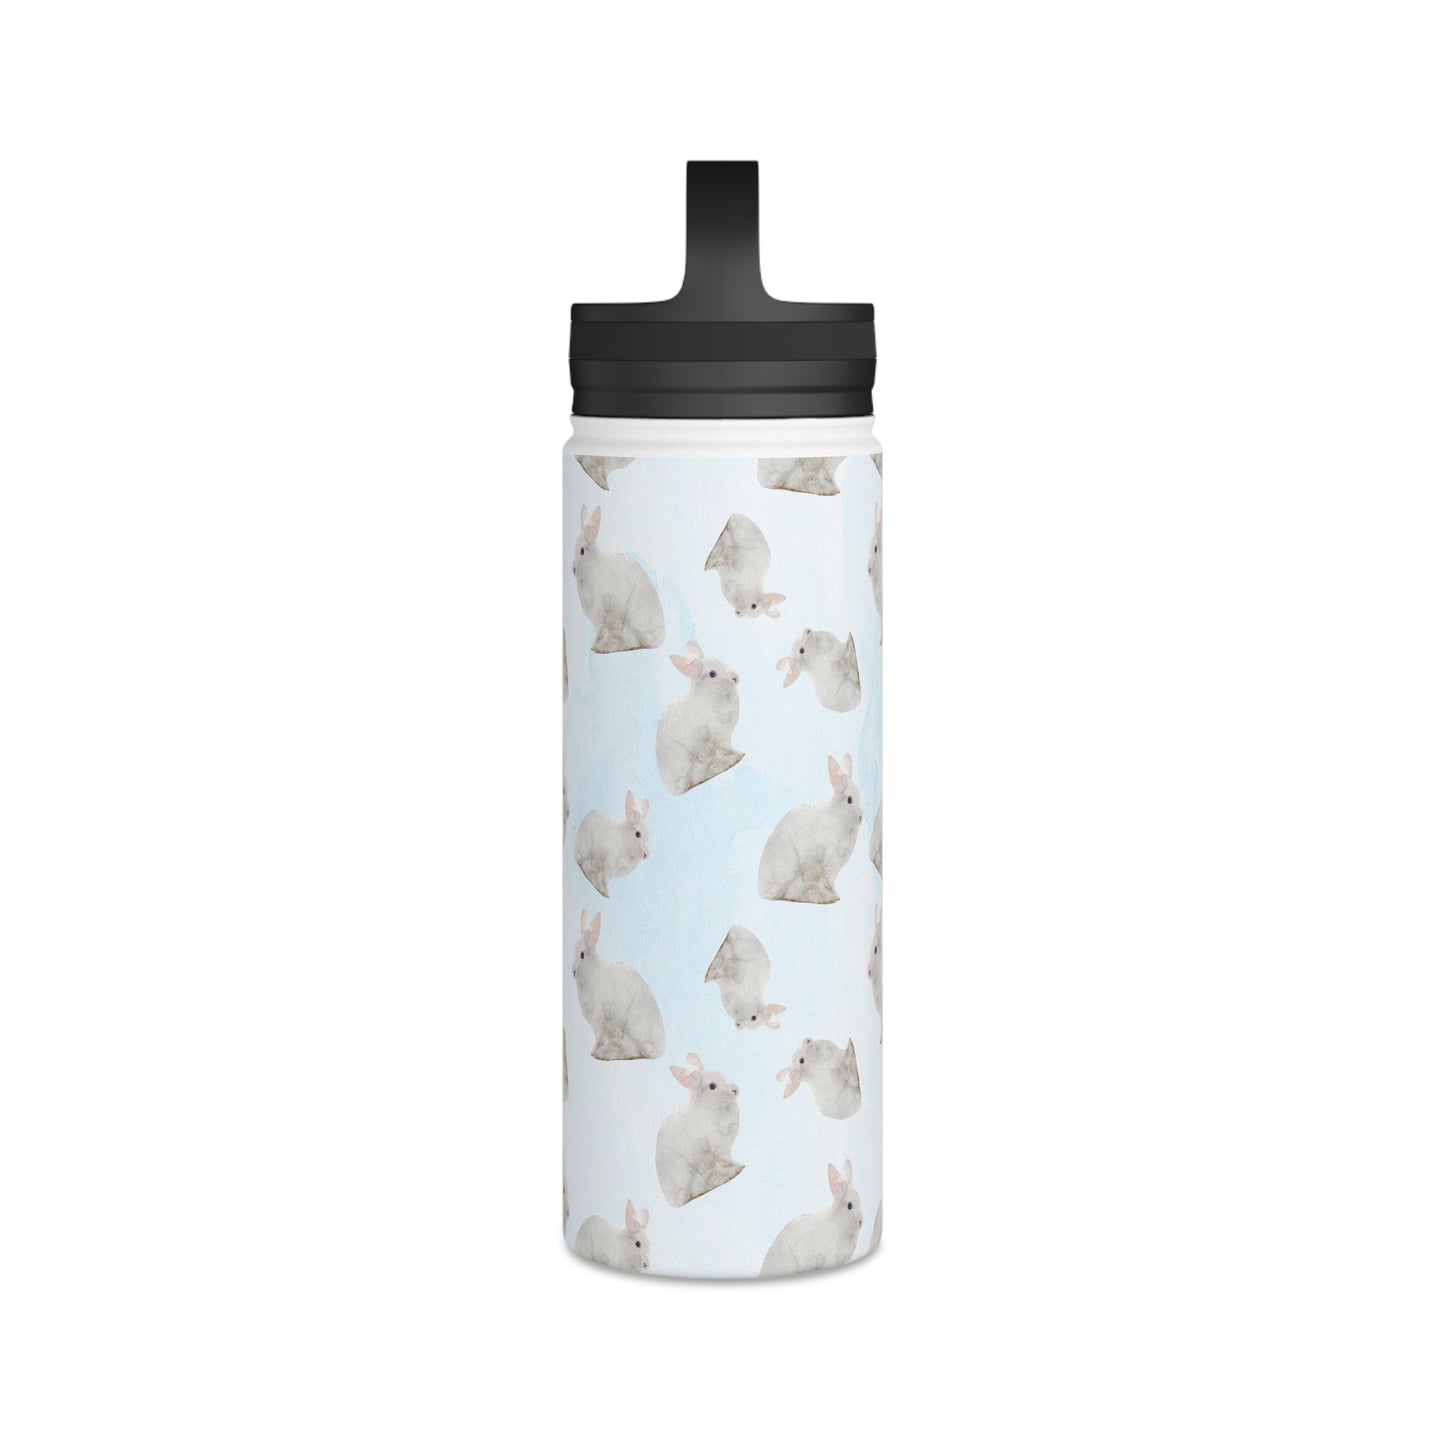 Back To School Rabbits Stainless Steel Water Bottle, Handle Lid